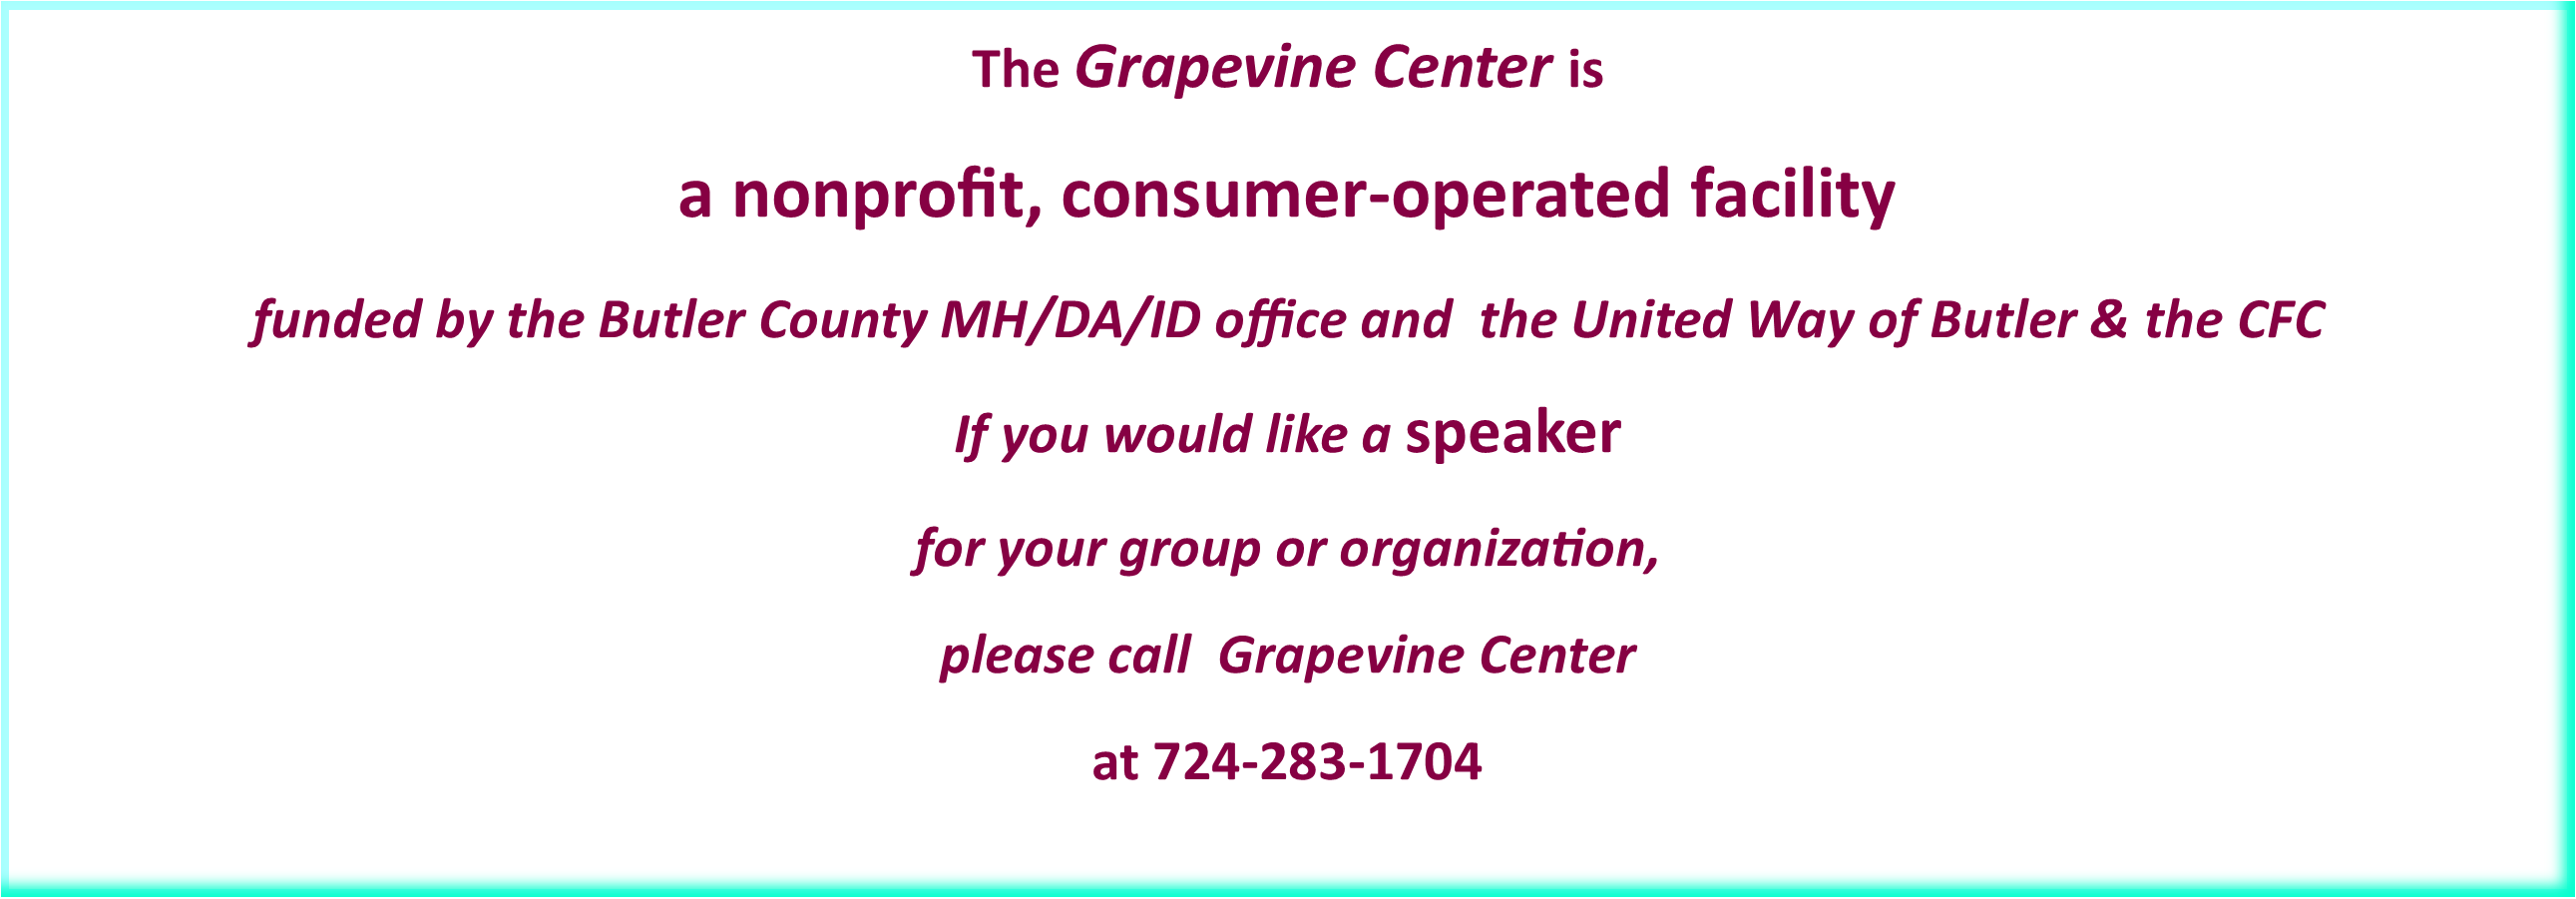 Grapevine Center is a consumer-operated facility.  Funded by Butler County